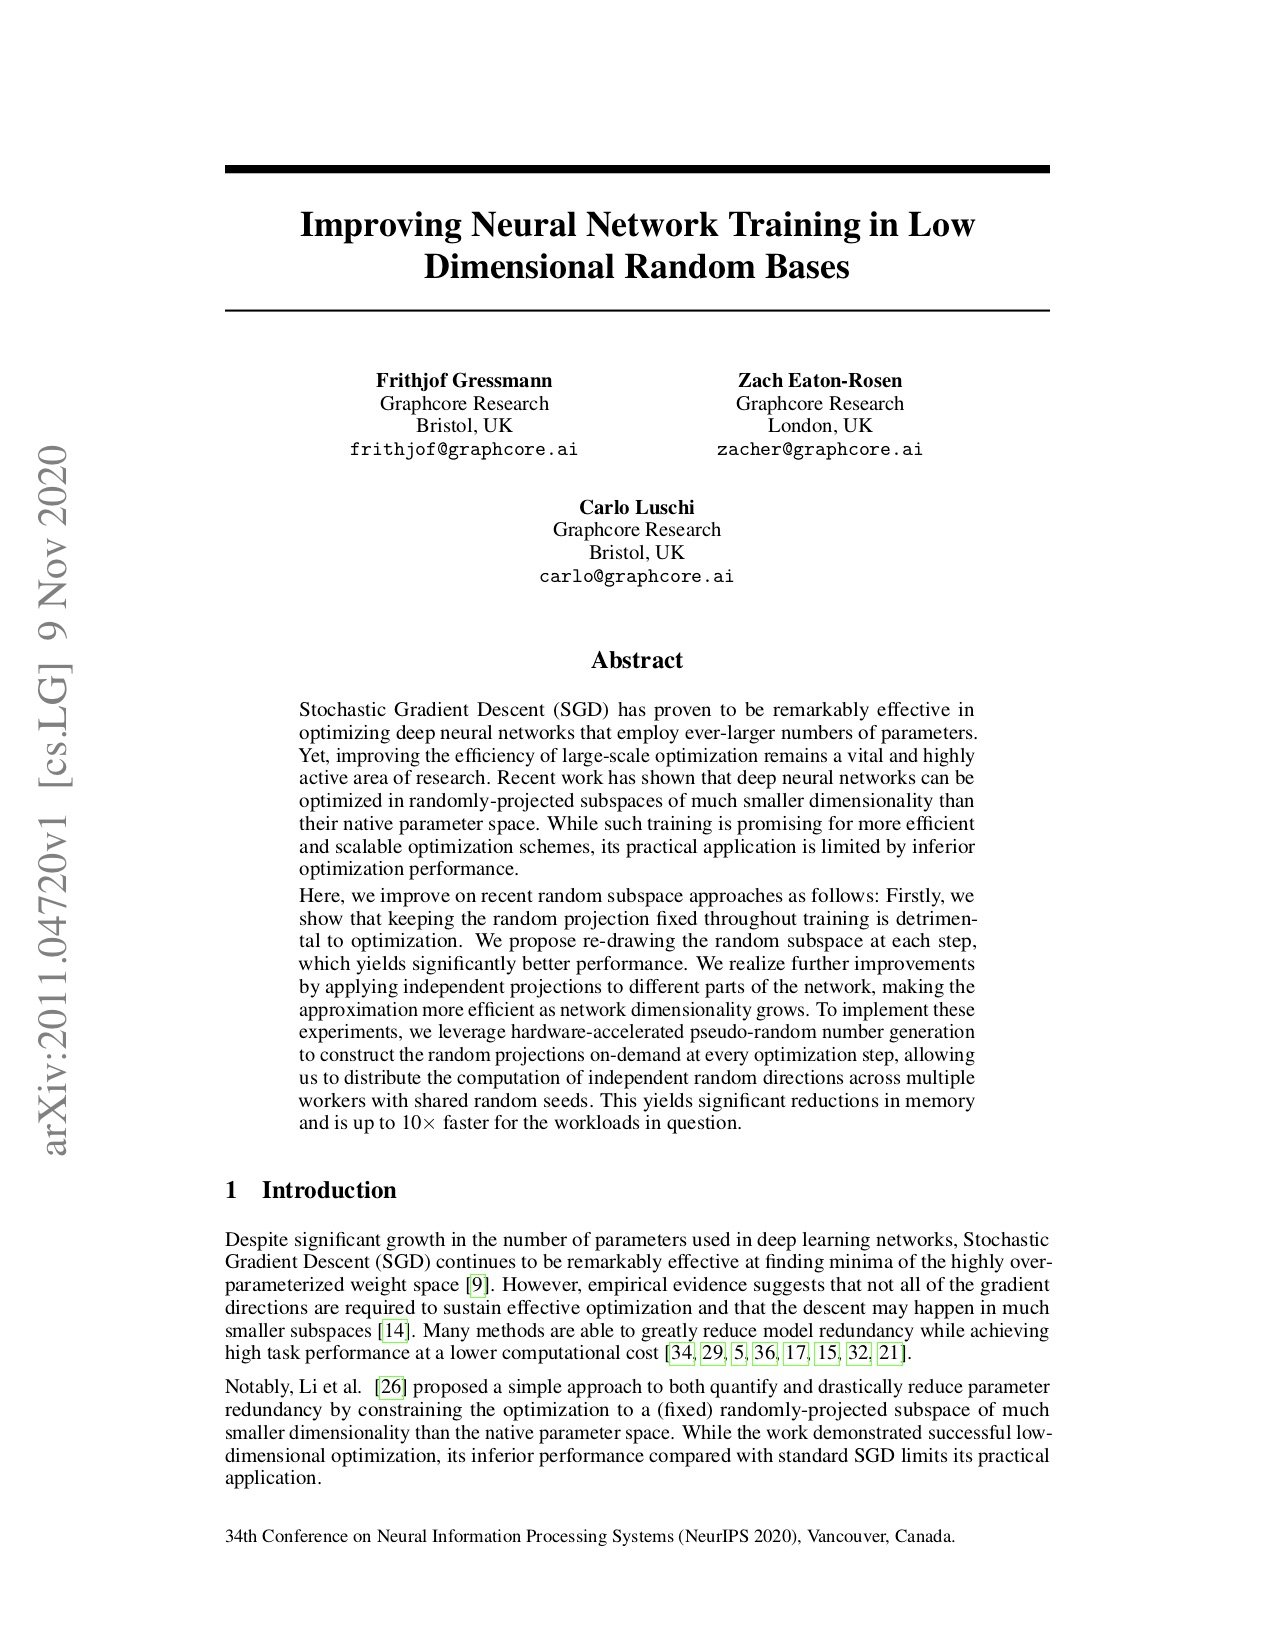 Graphcore Research: Improving Neural Network Training in Low Dimensional Random Bases